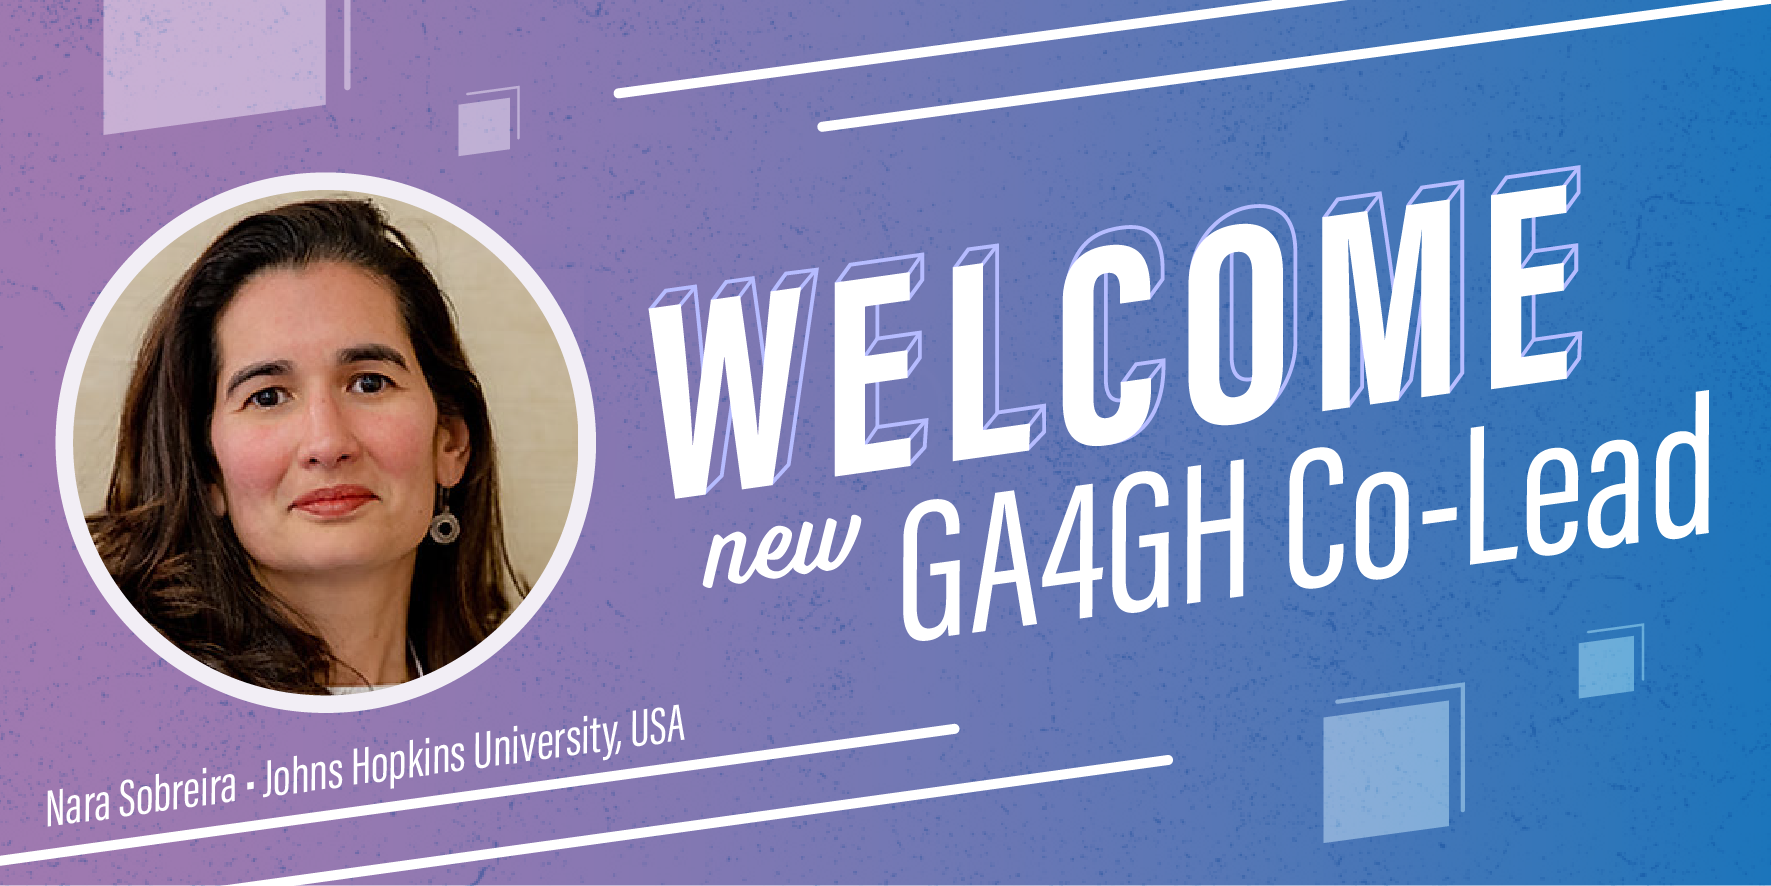 Image of Nara Sobreira next to words &quot;Welcome new GA4GH Co-Lead&quot;